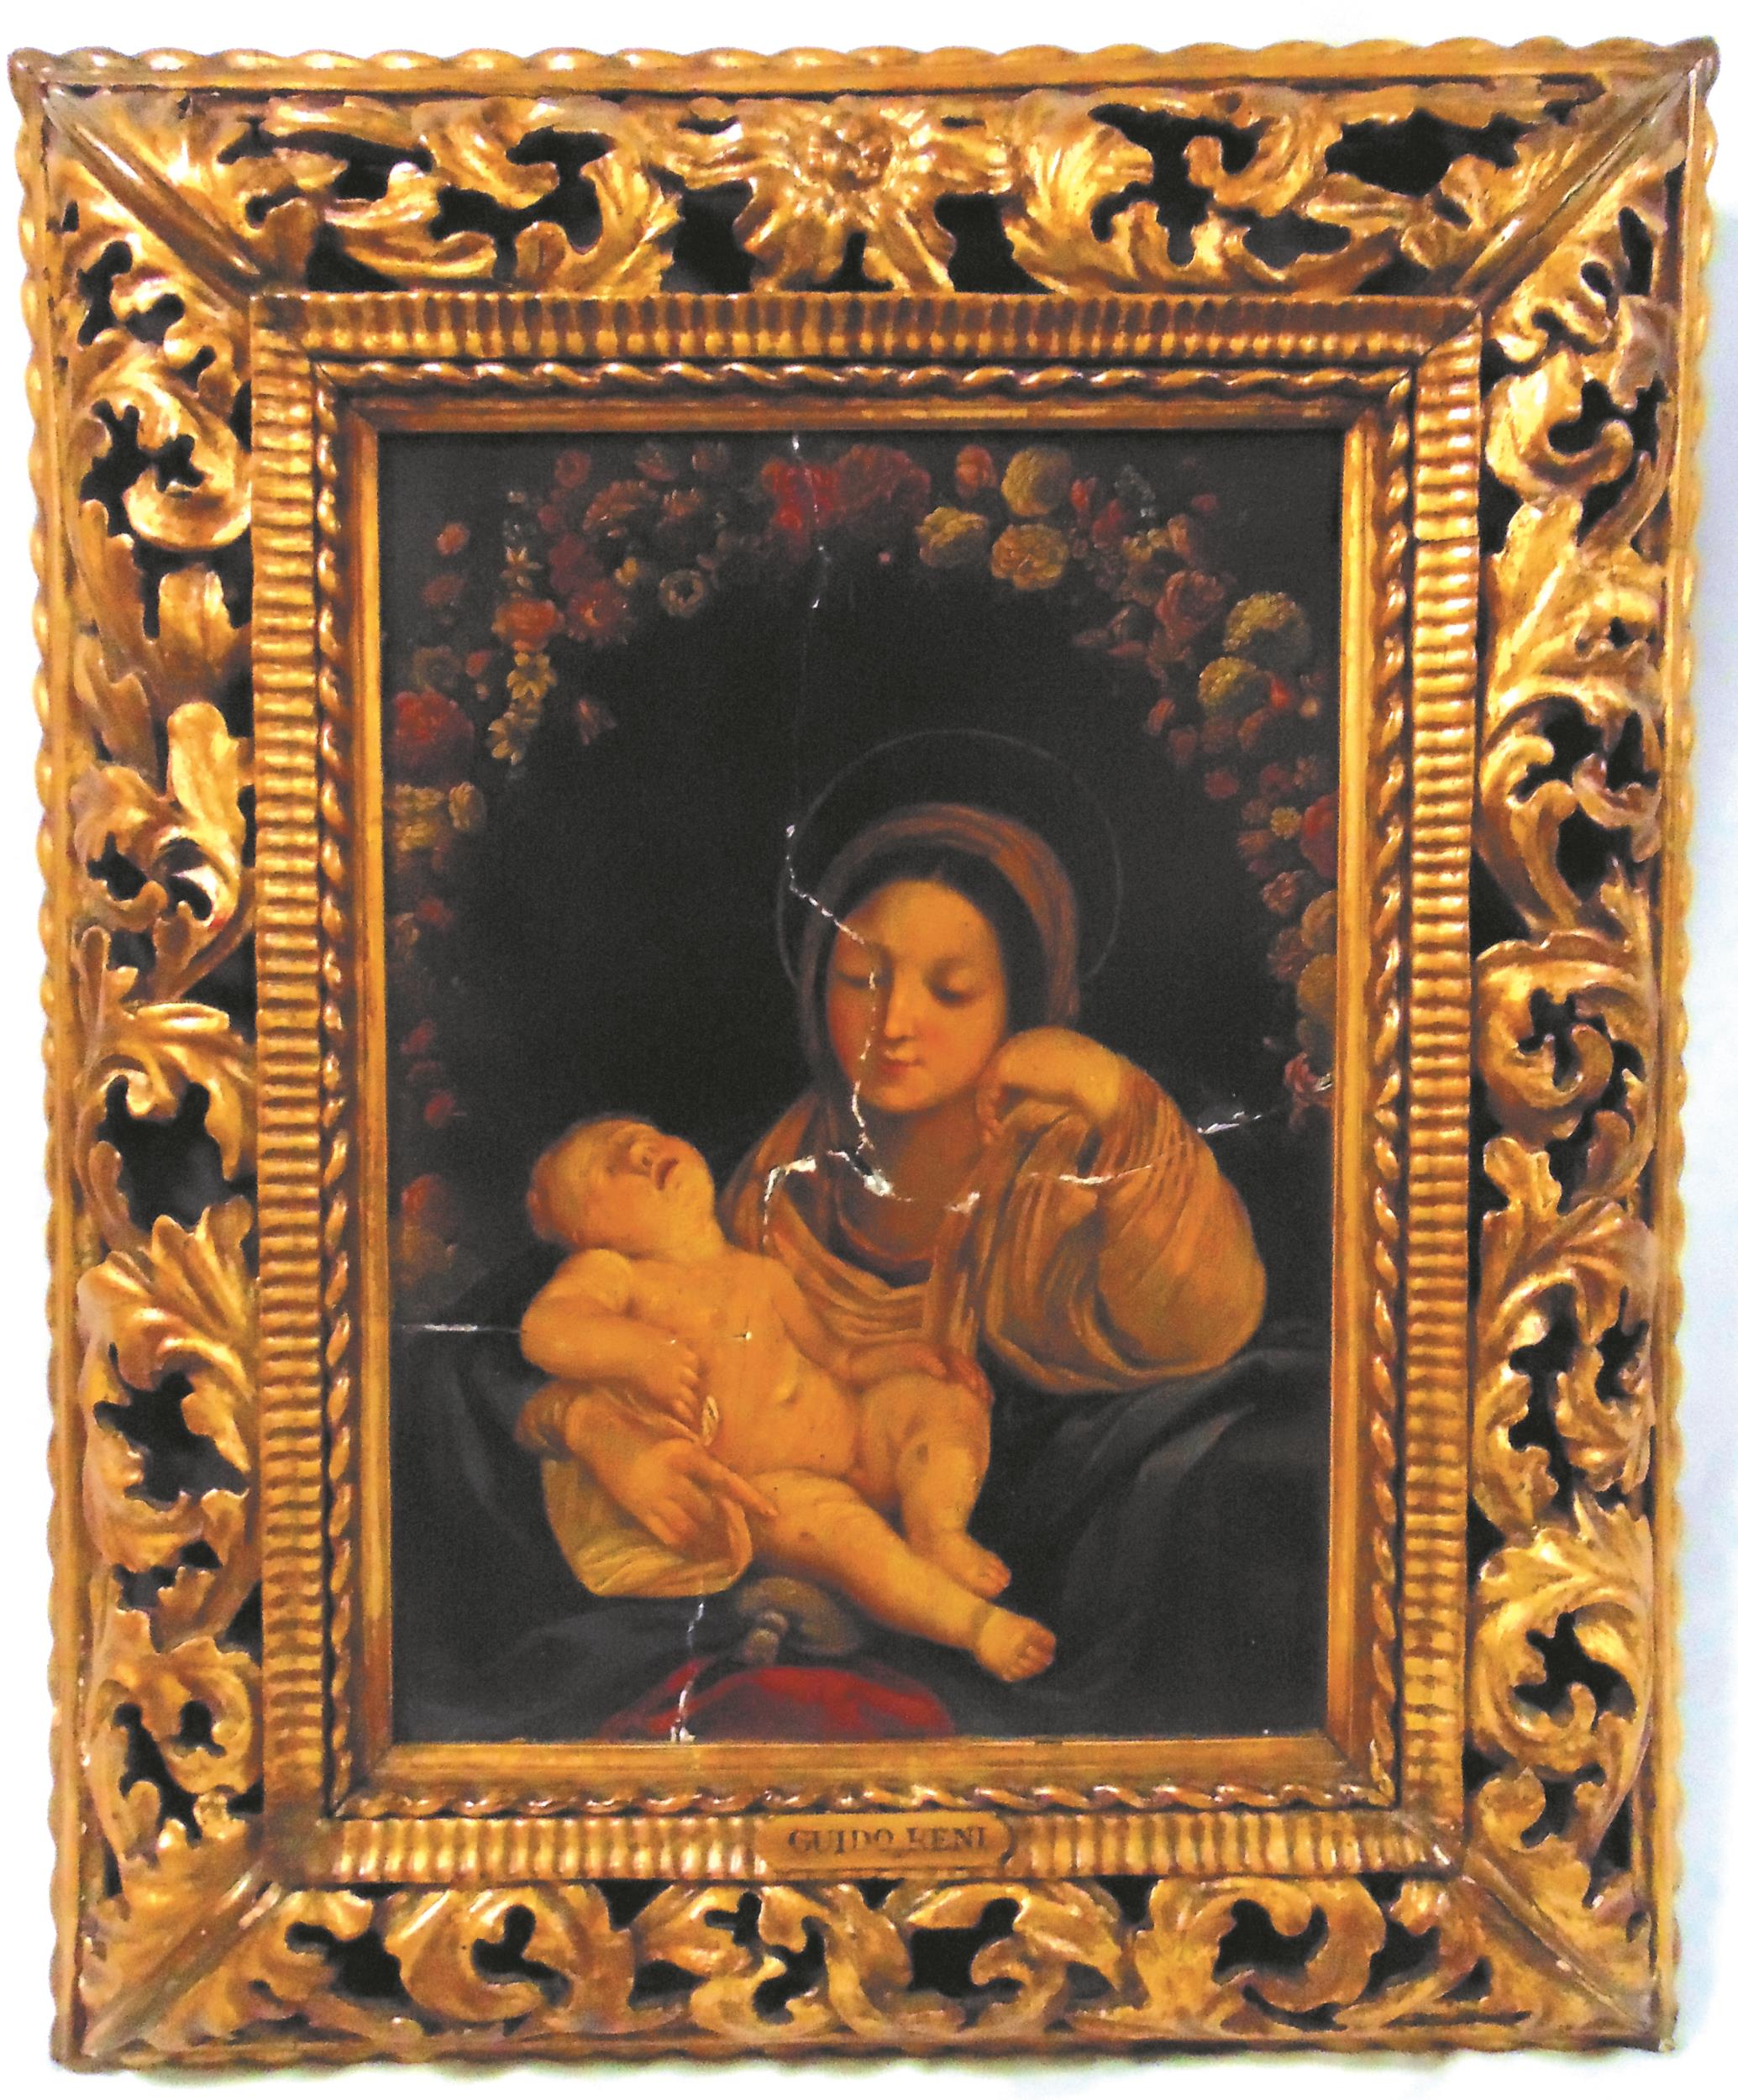 Italian school late 17th early 18th century oil on ceramic mounted on board in decorative gilded